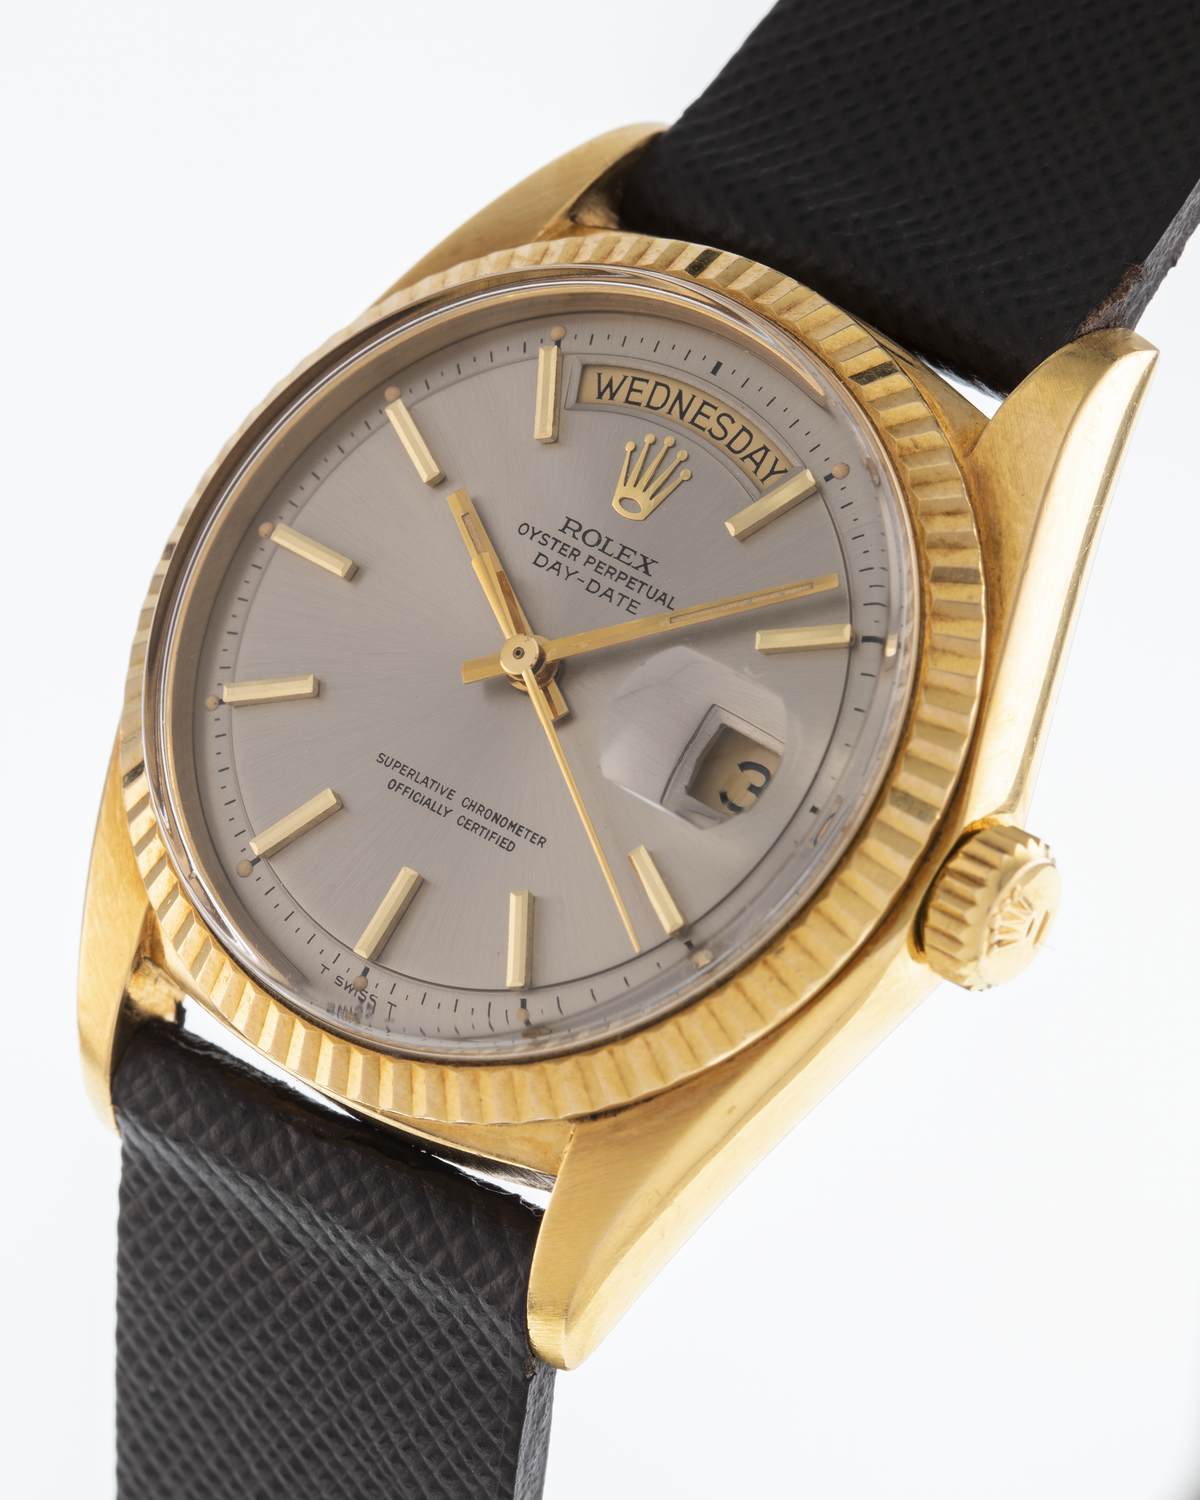 Rolex Oyster Perpetual Day Date grey dial Ref. 1803